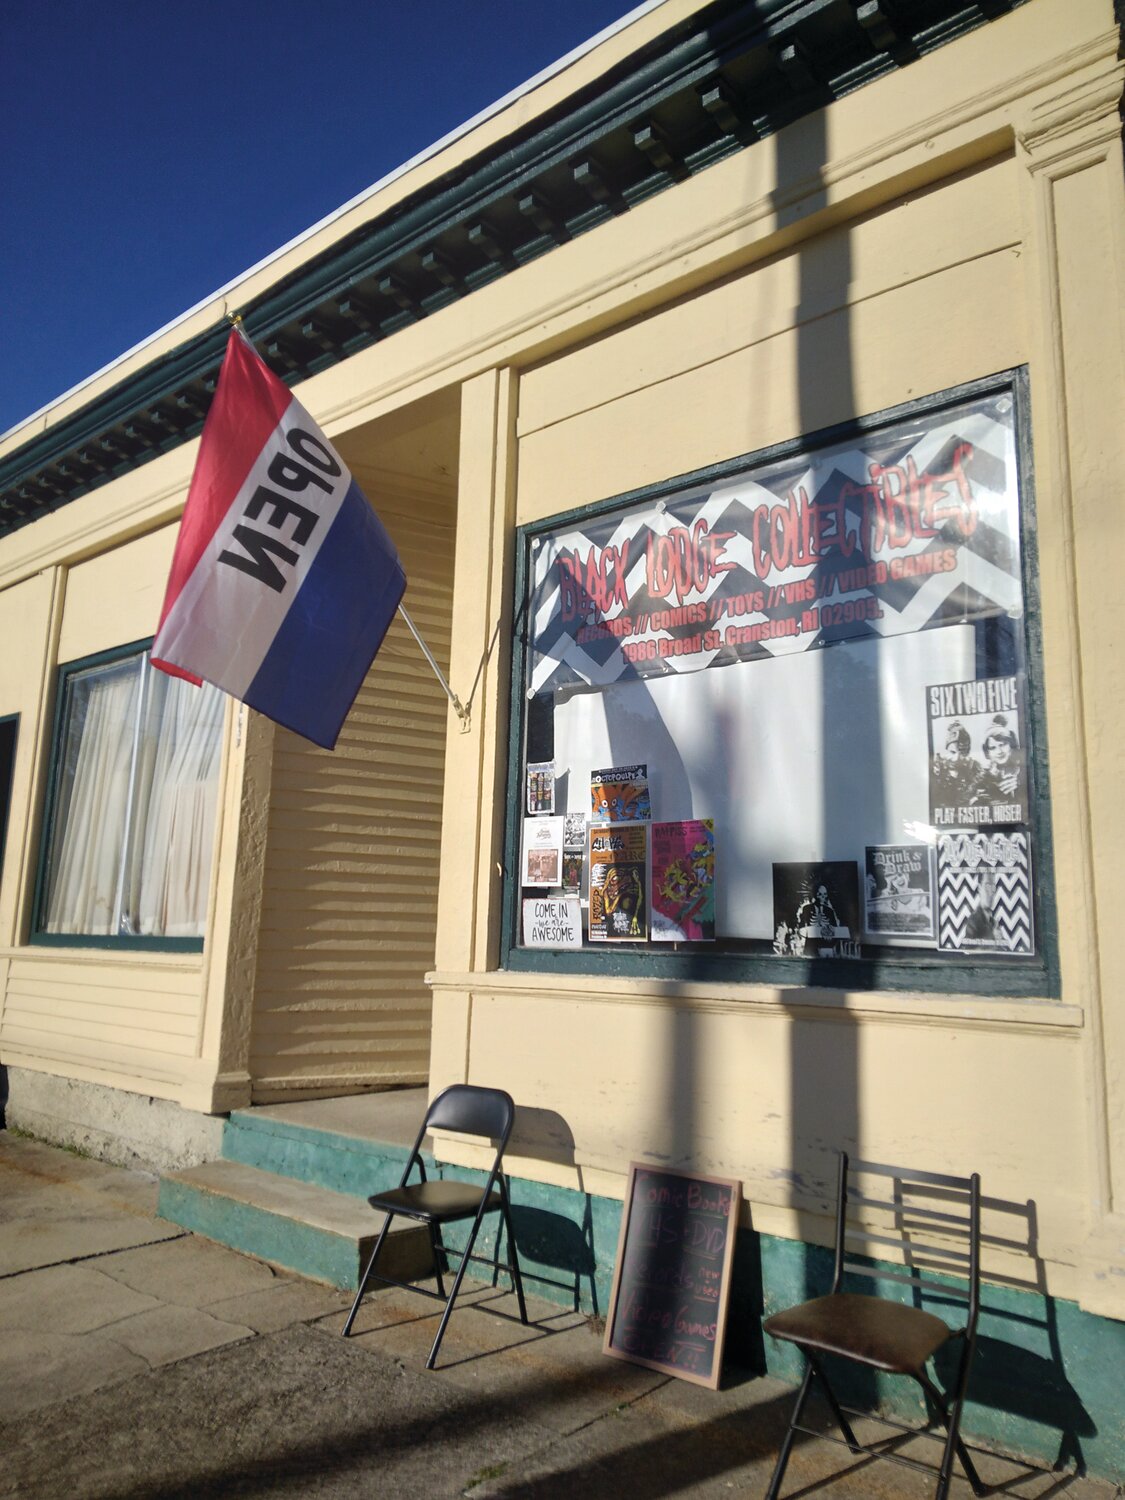 Black Lodge Collectibles is located at 1986 Broad Street in Cranston.